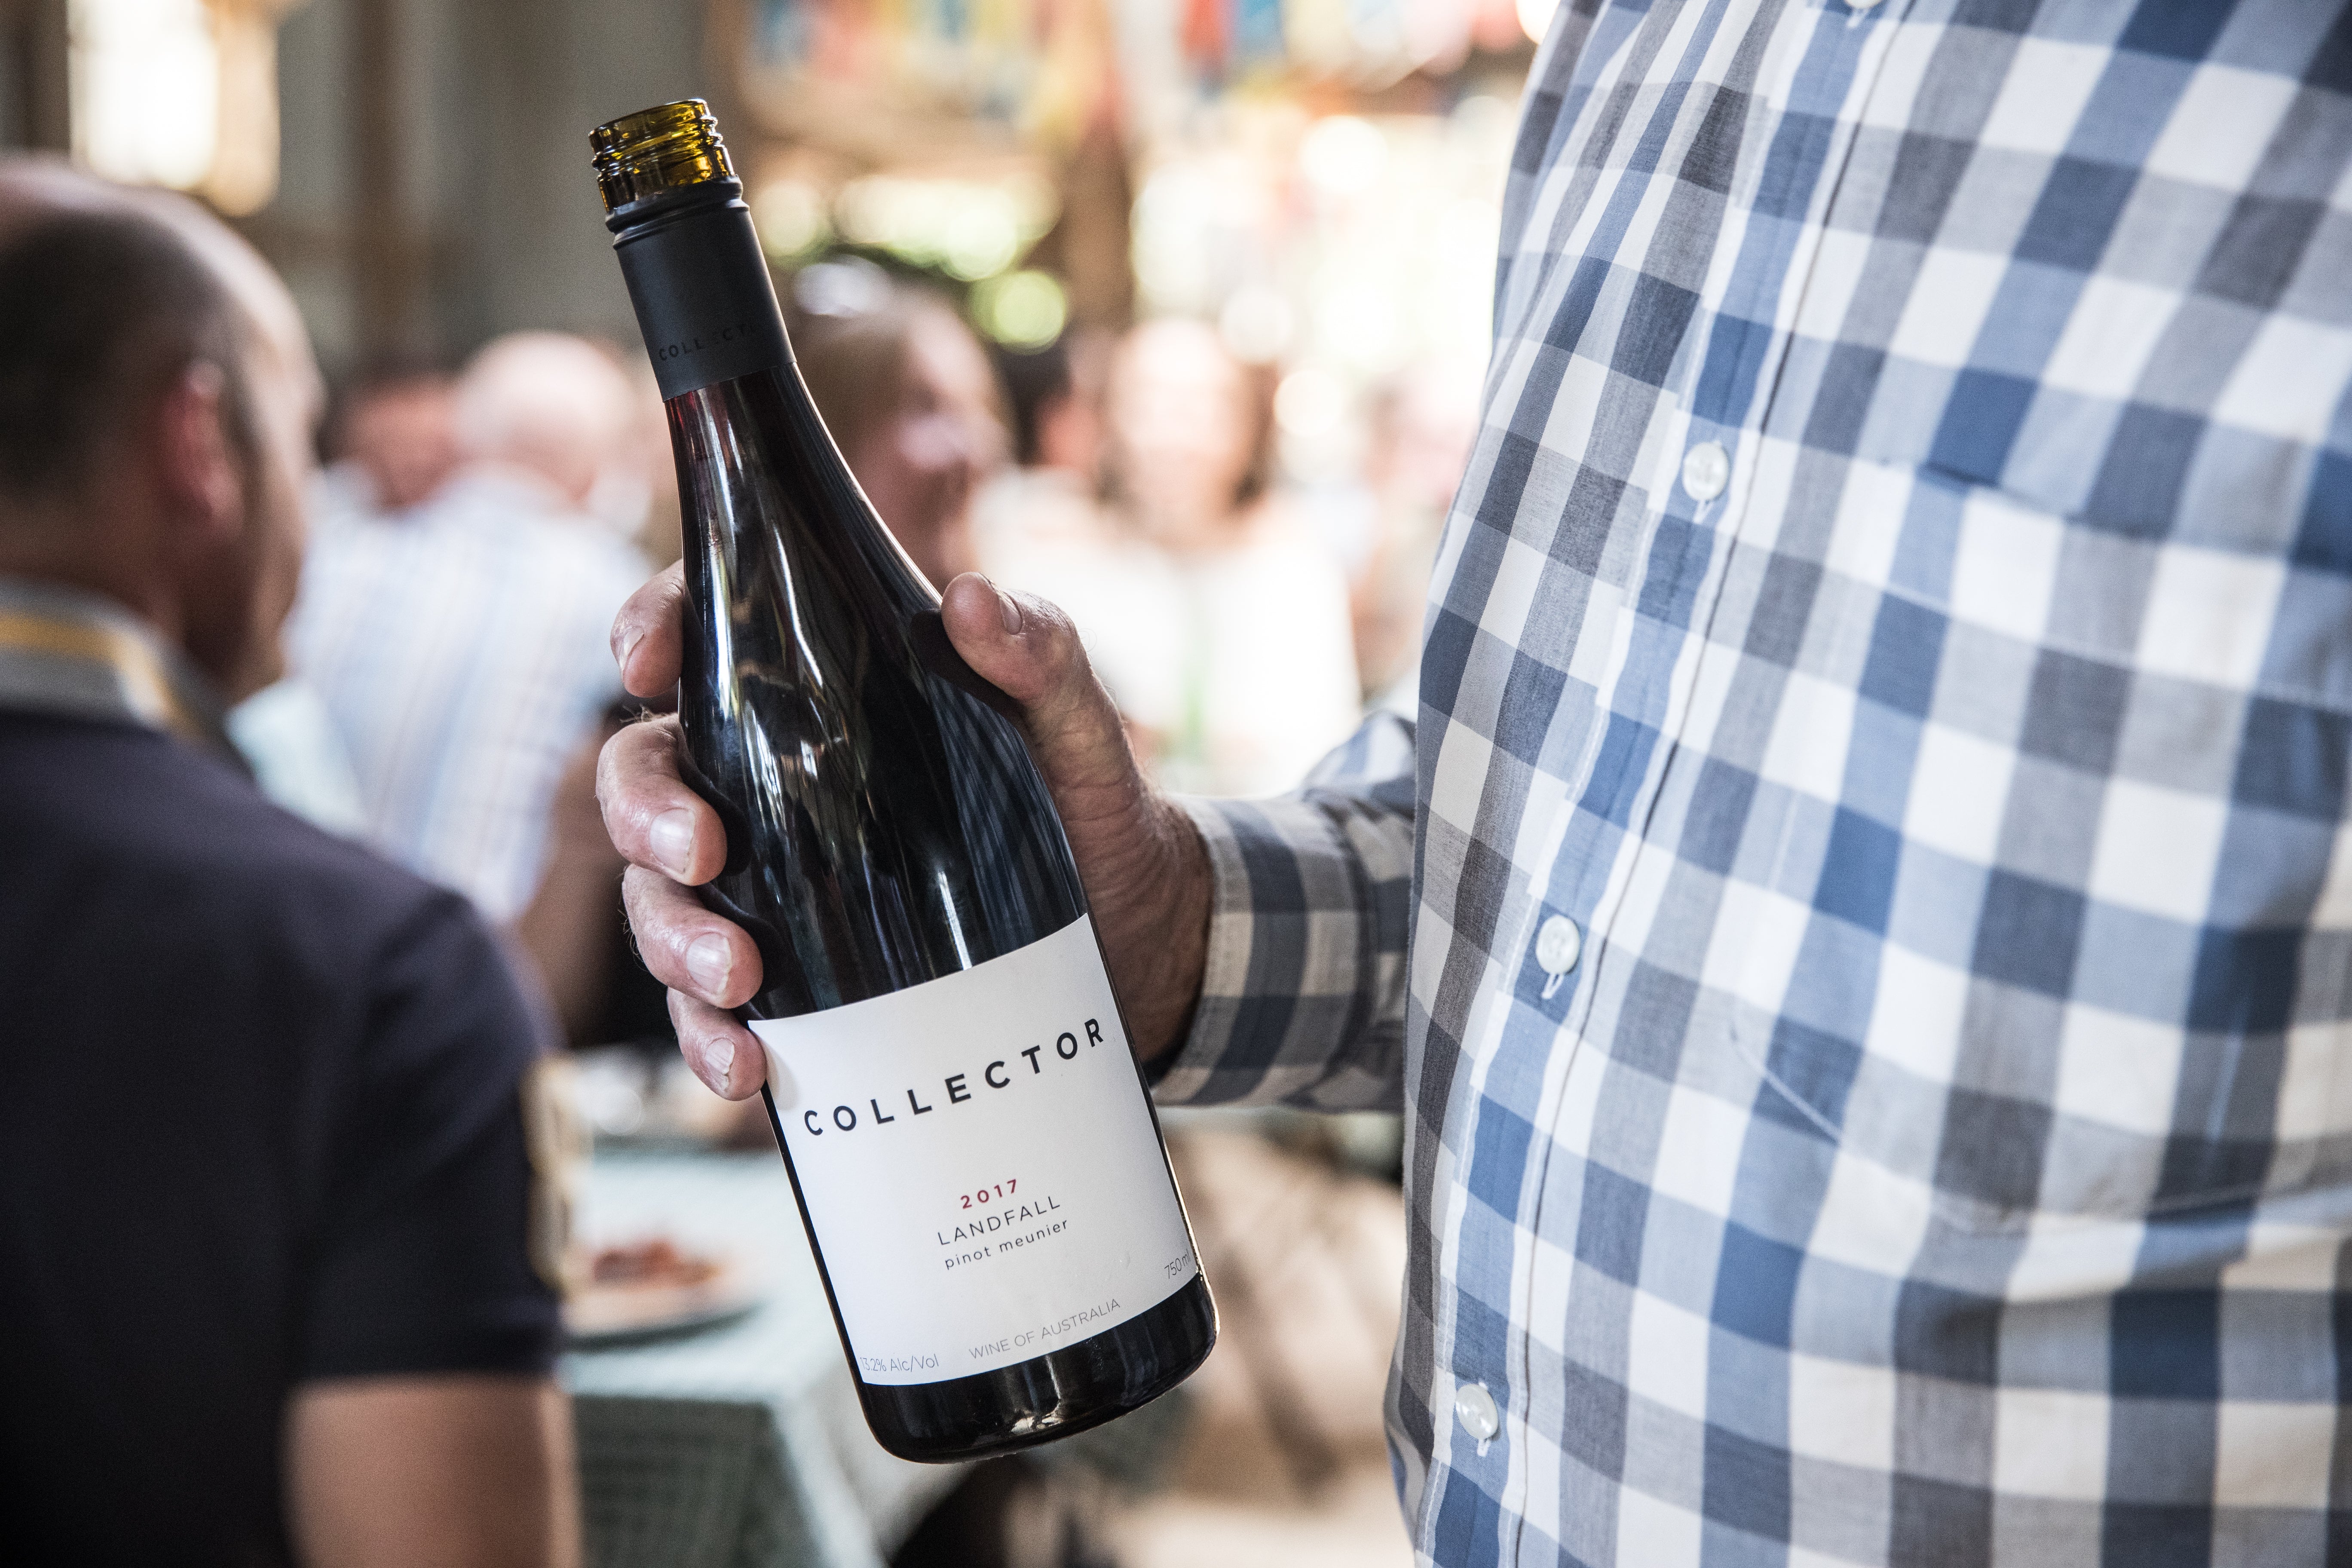 A gentleman in a blue checked shirt holds a bottle of the Landfall Pinot Meunier. In the background, people are celebrating.